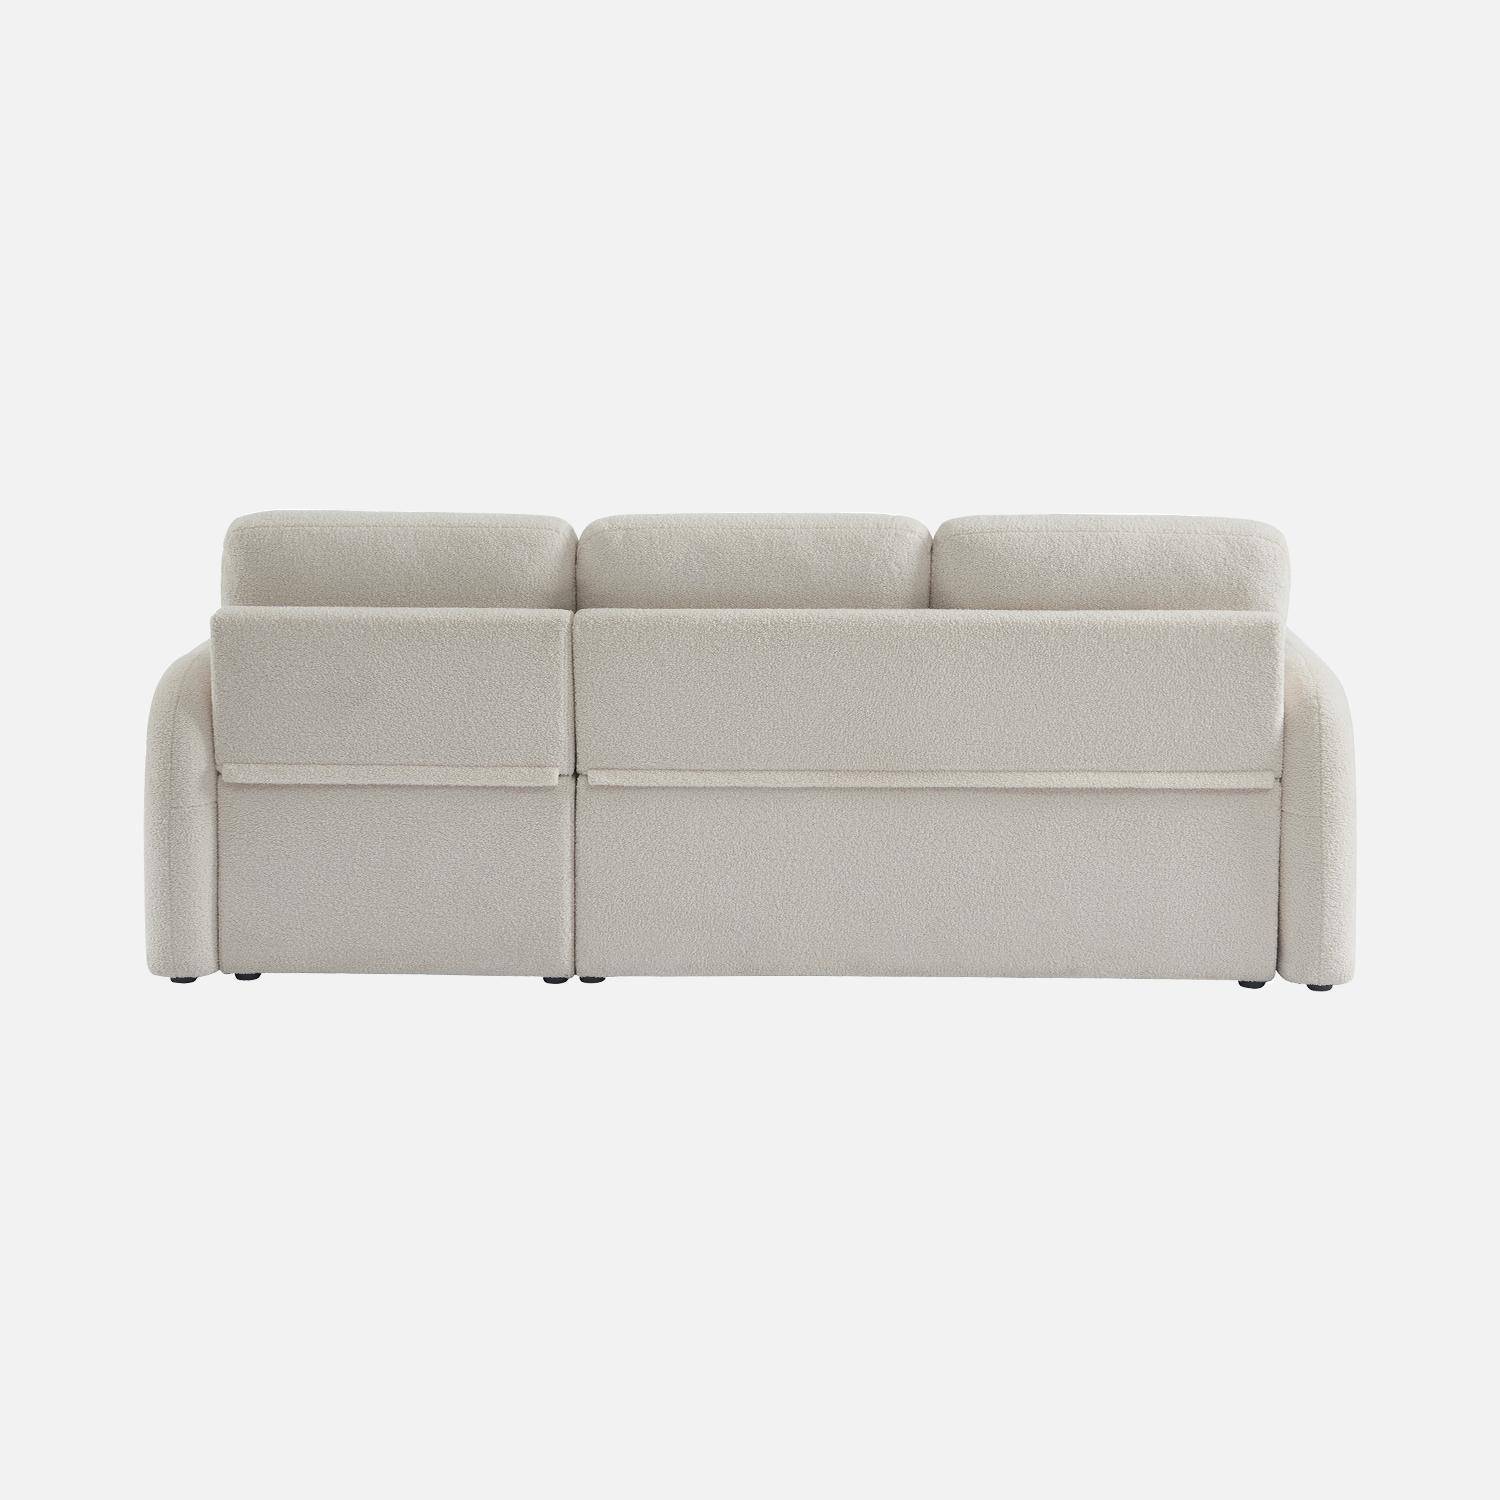 3-seater reversible corner sofa bed with storage box - Milano, Ecru, boucle fabric, rounded lines Photo8